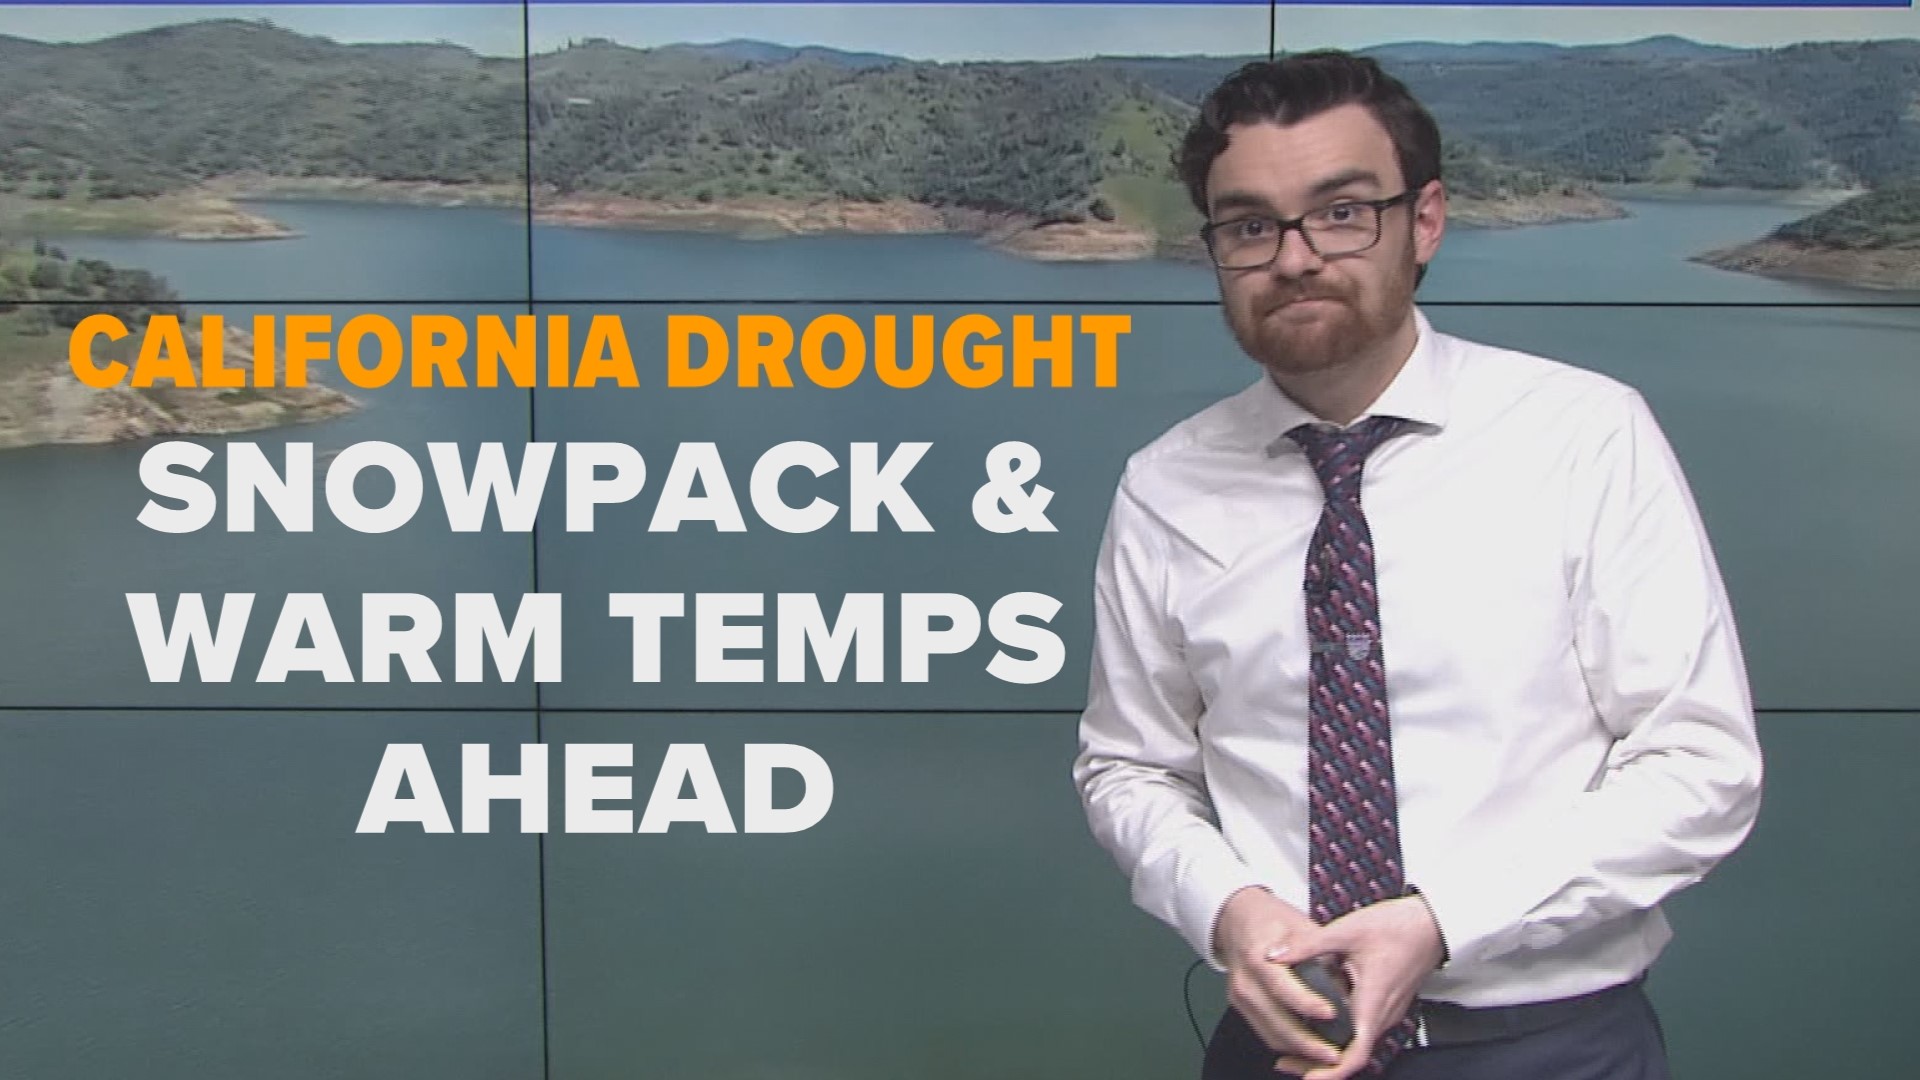 ABC10 meteorologist Brenden Mincheff examines our water situation ahead of abnormally warm conditions. Plus, a conversation about California's rangelands.